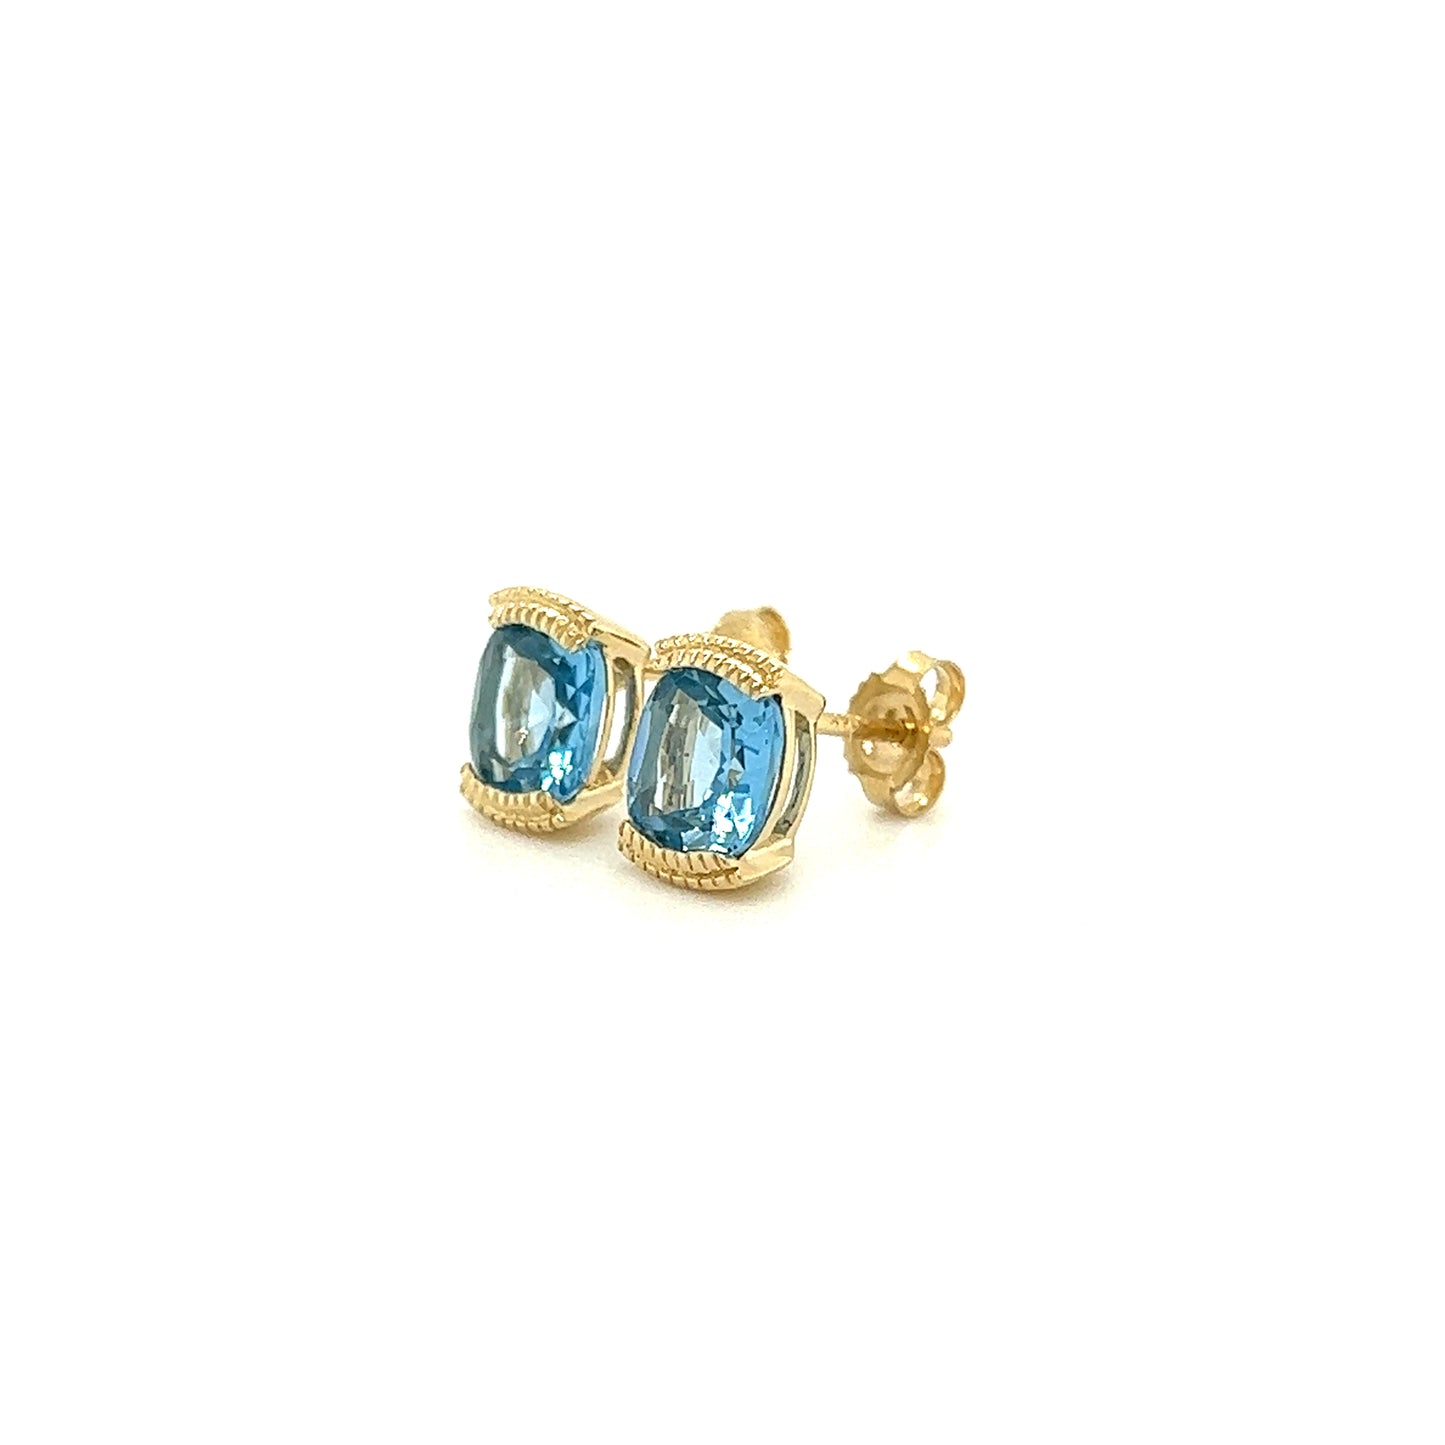 Cushion Blue Topaz Stud Earrings with 1.78ctw of Swiss Blue Topaz in 14K Yellow Gold Right Side View